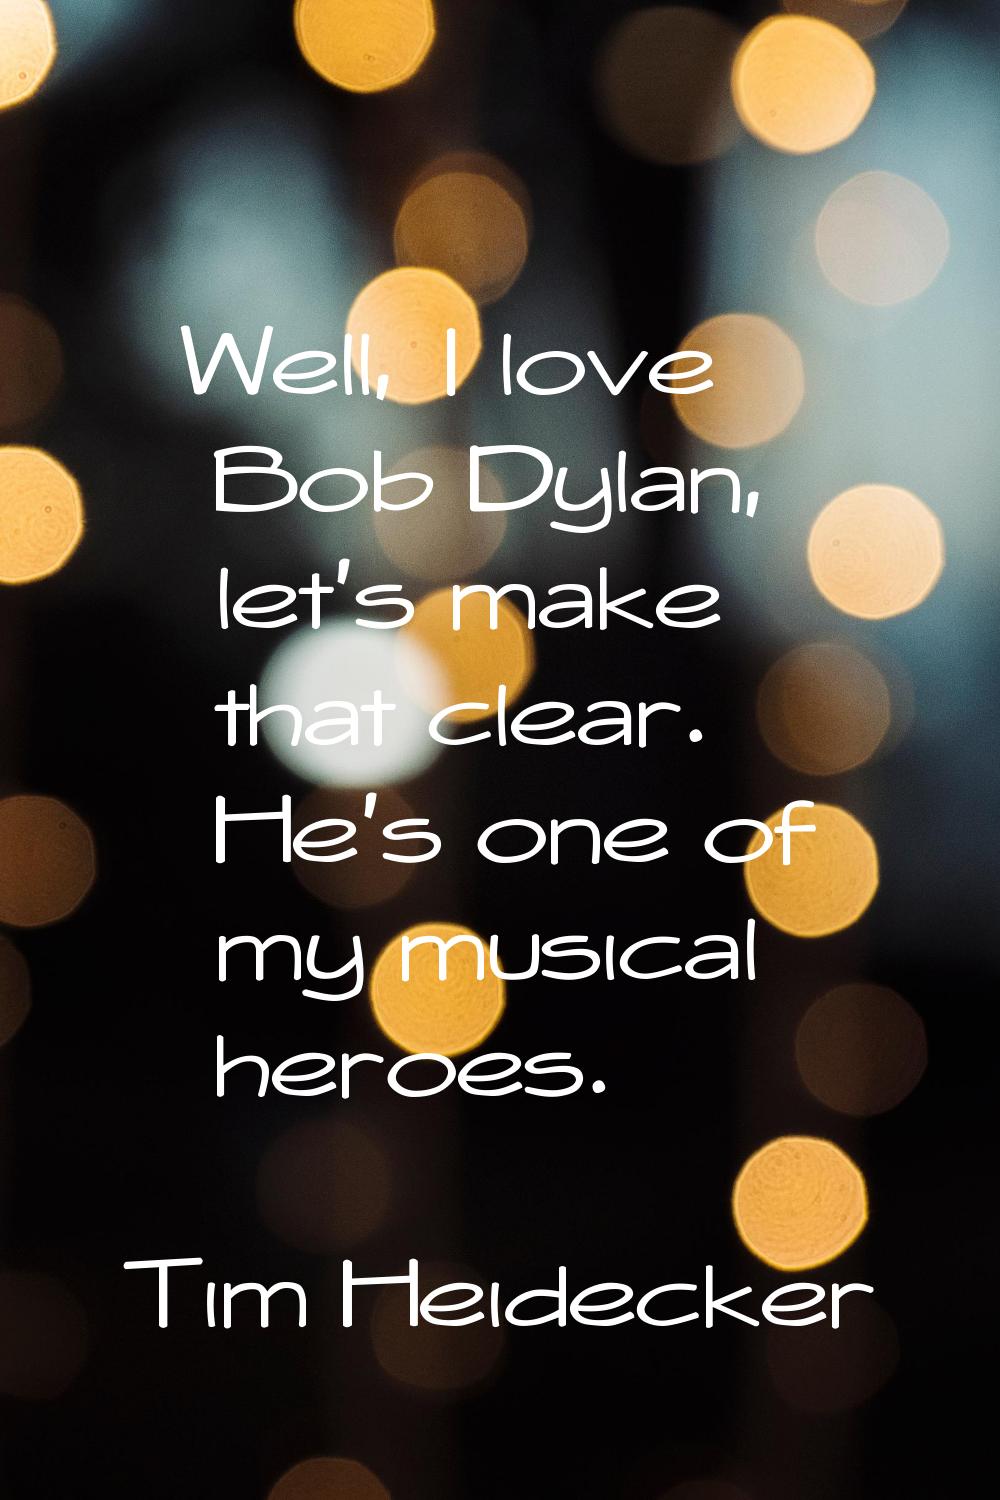 Well, I love Bob Dylan, let's make that clear. He's one of my musical heroes.